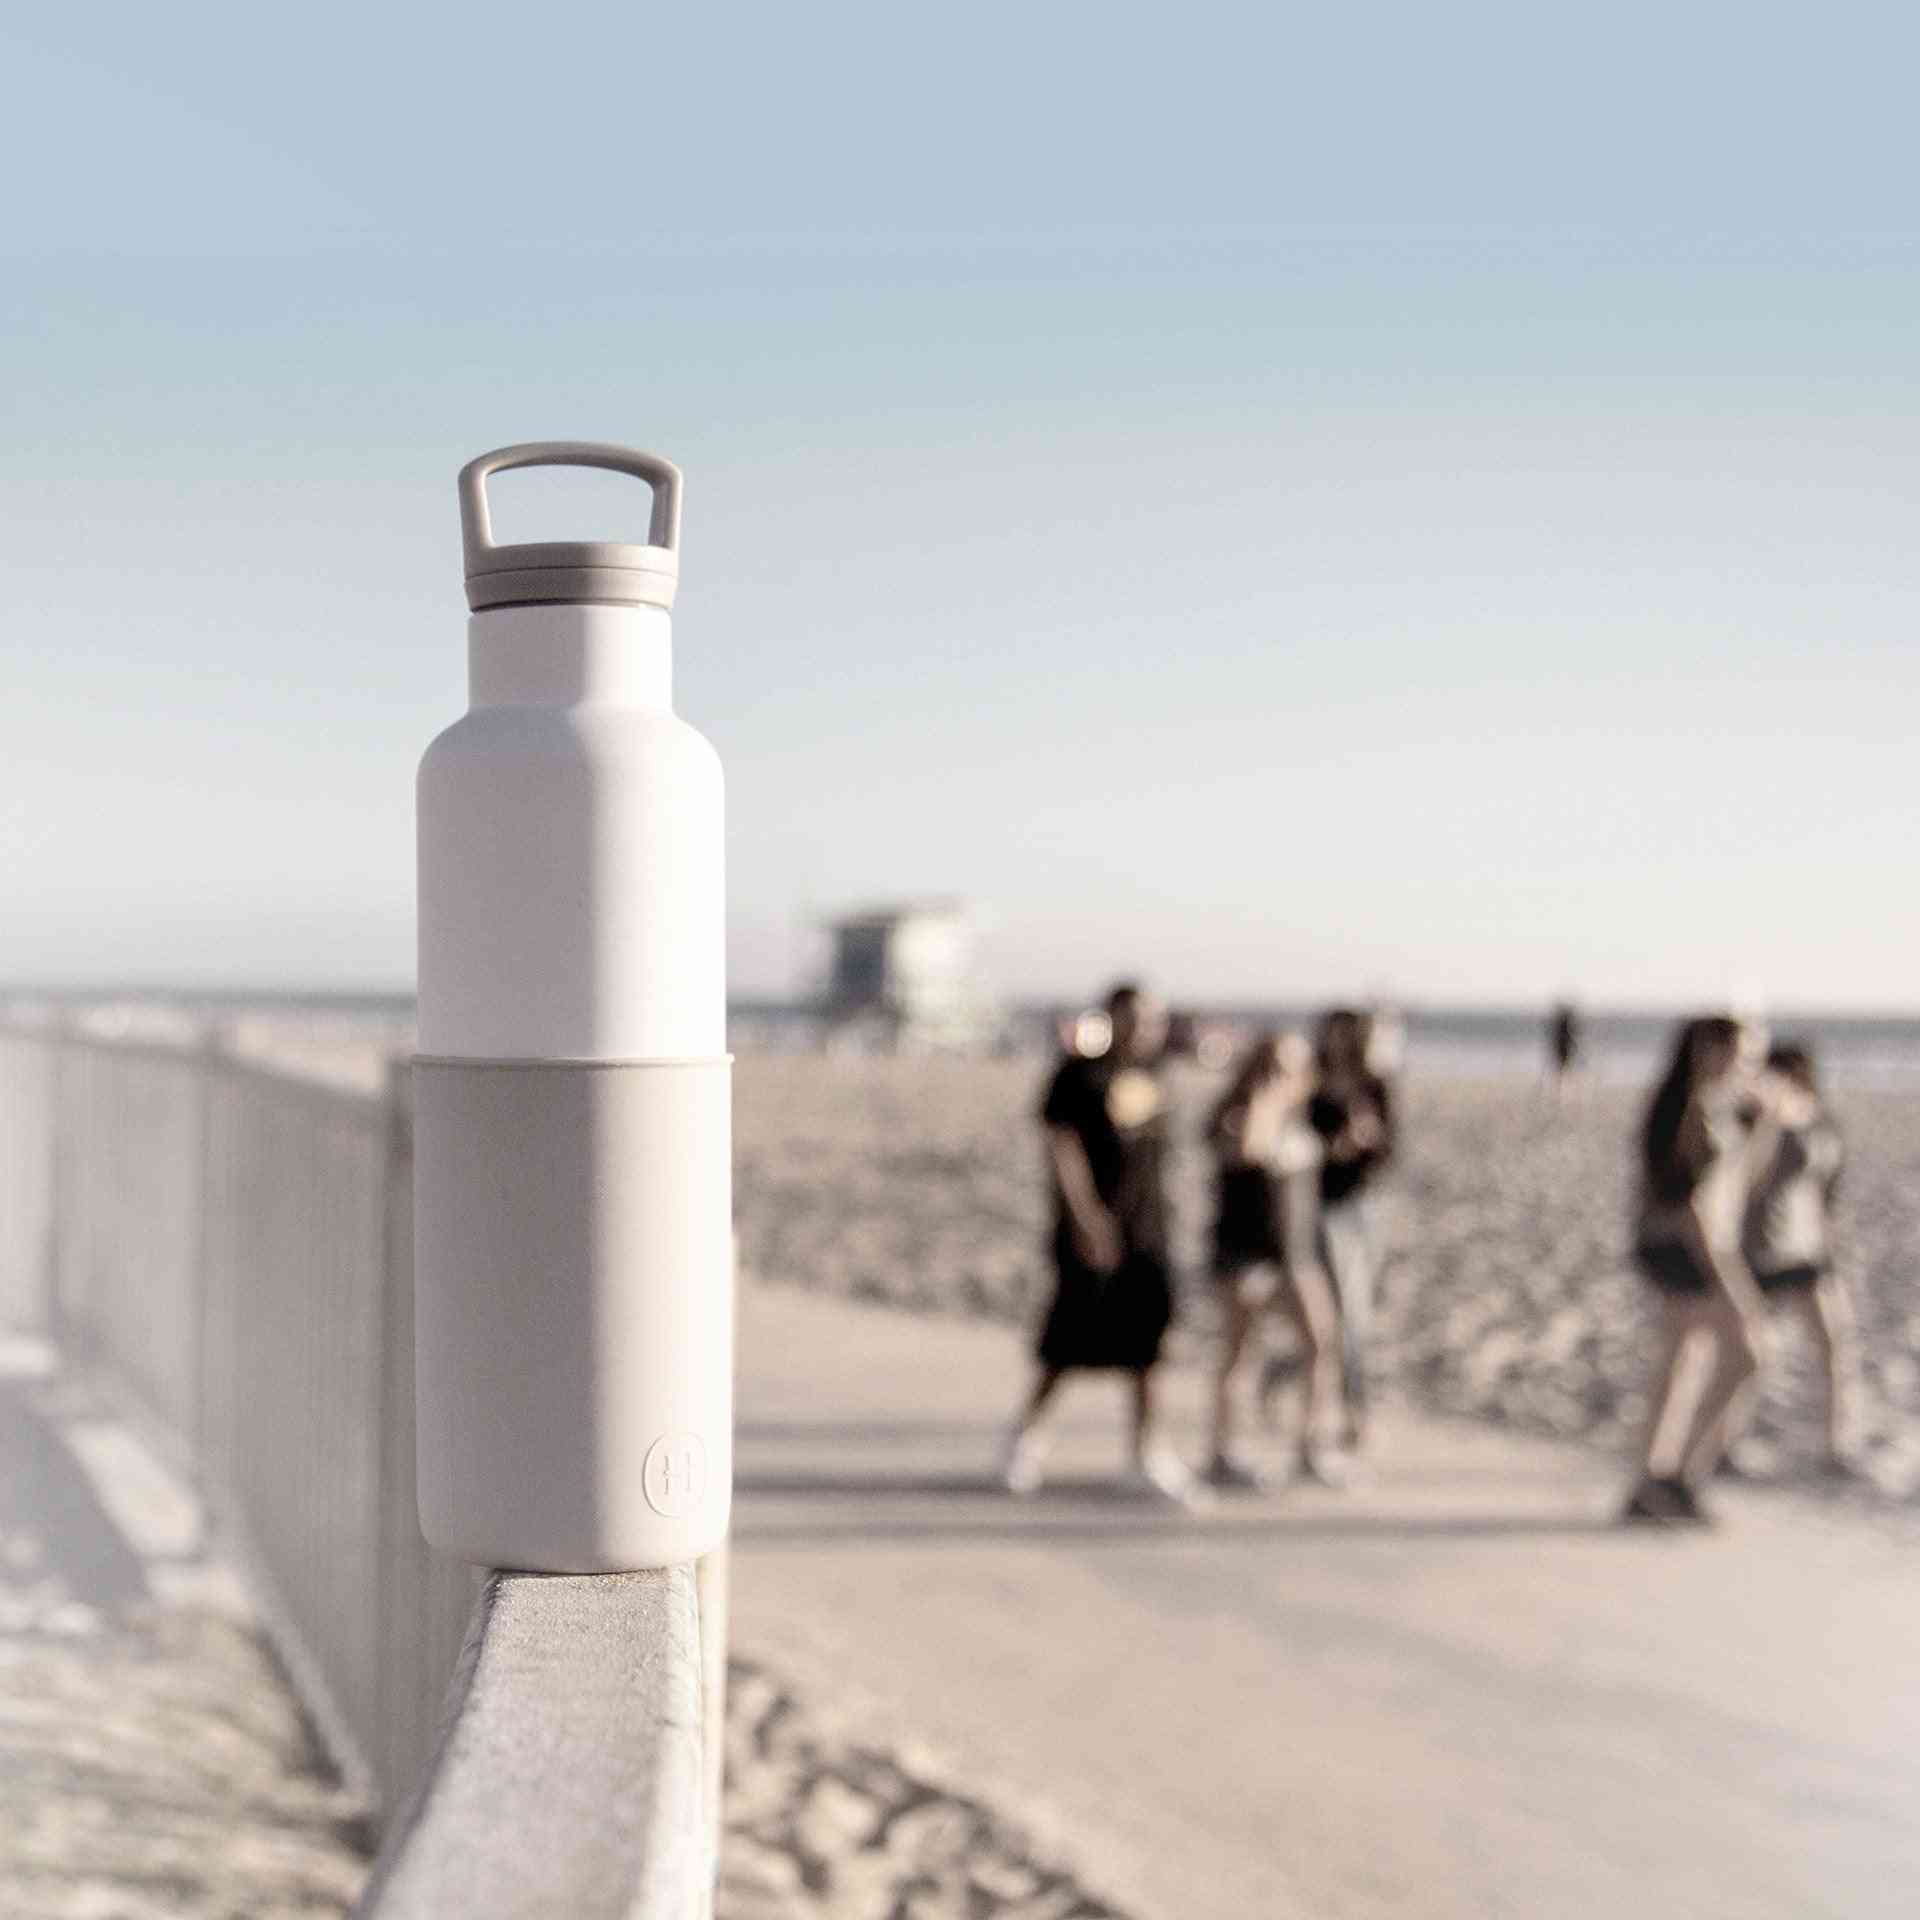 Stainless Steel White Thermal Water Bottle